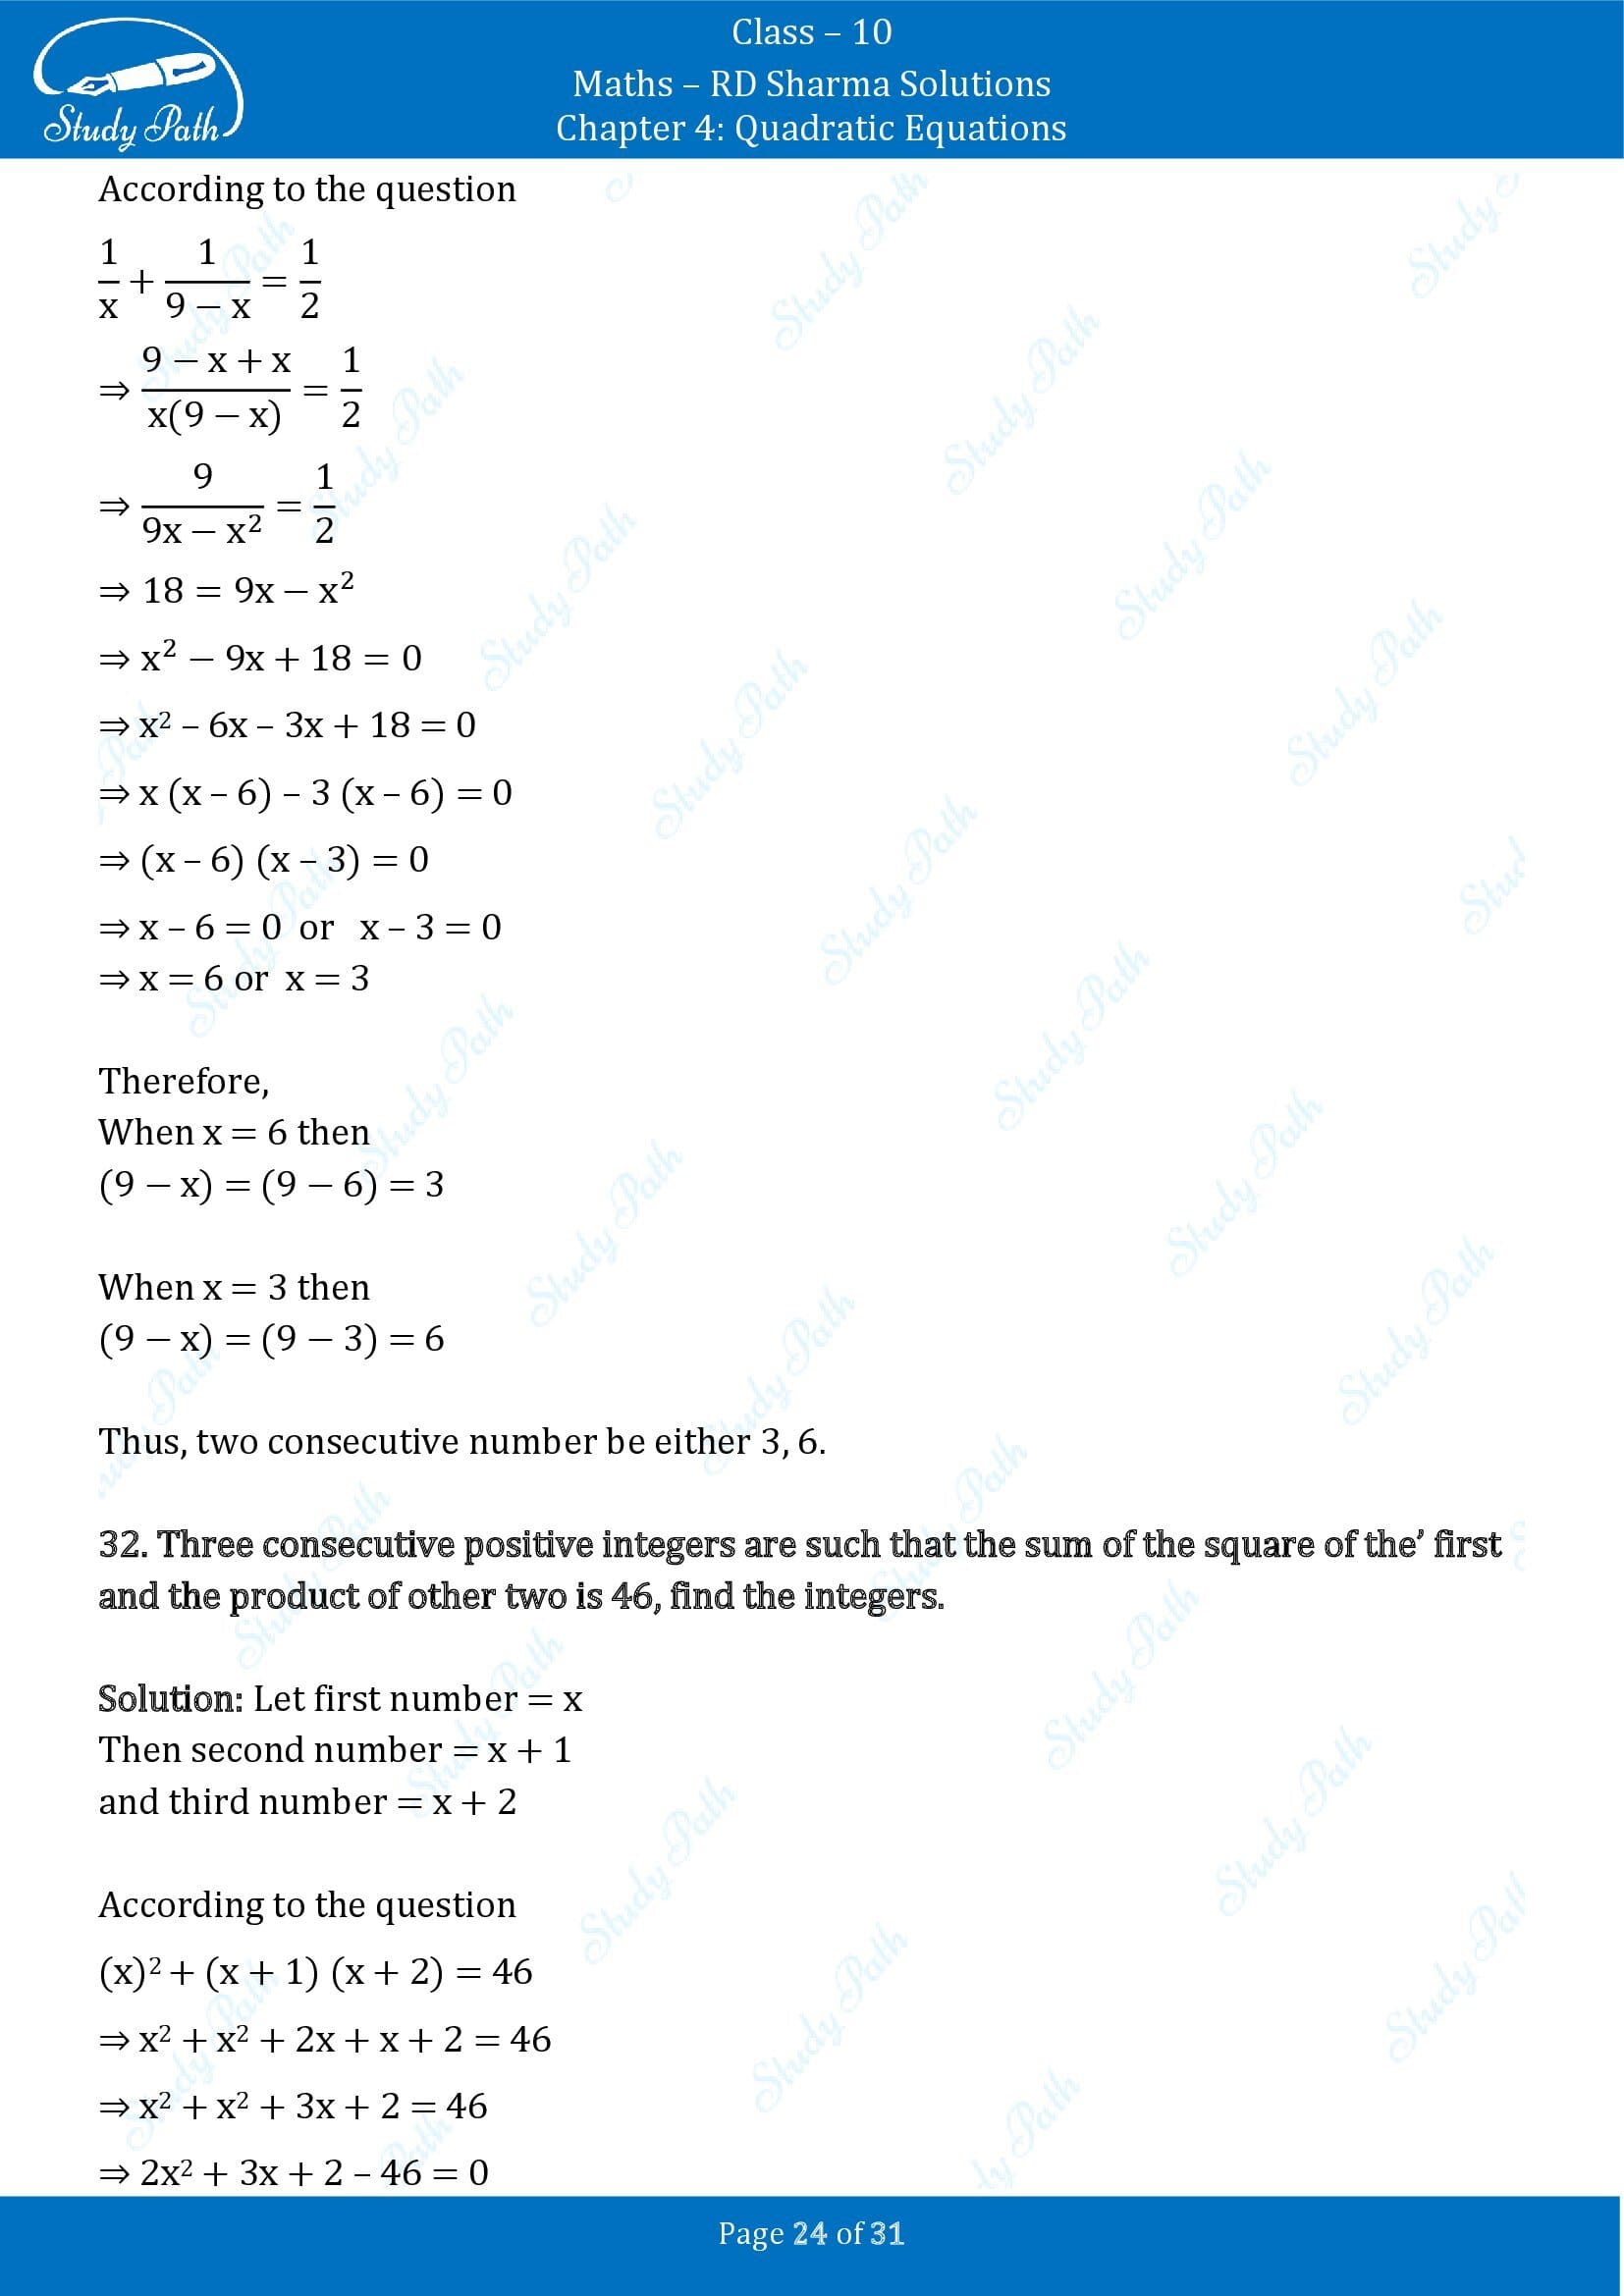 RD Sharma Solutions Class 10 Chapter 4 Quadratic Equations Exercise 4.7 00024